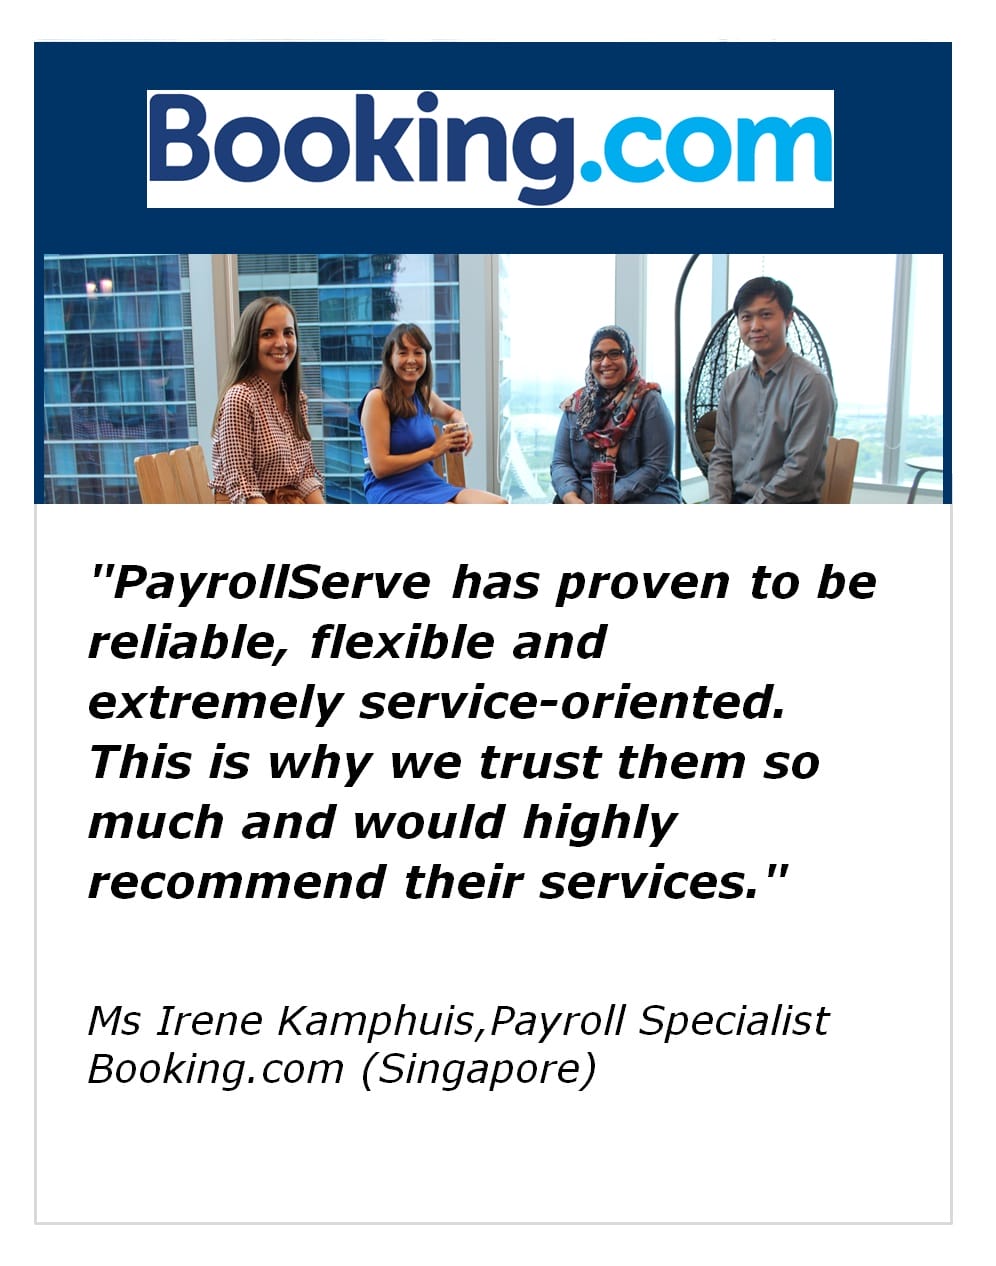 PayrollServe has proven to be reliable, flexible and extremely service-oriented. This is why we trust them so much and would highly recommend their service- Booking.com